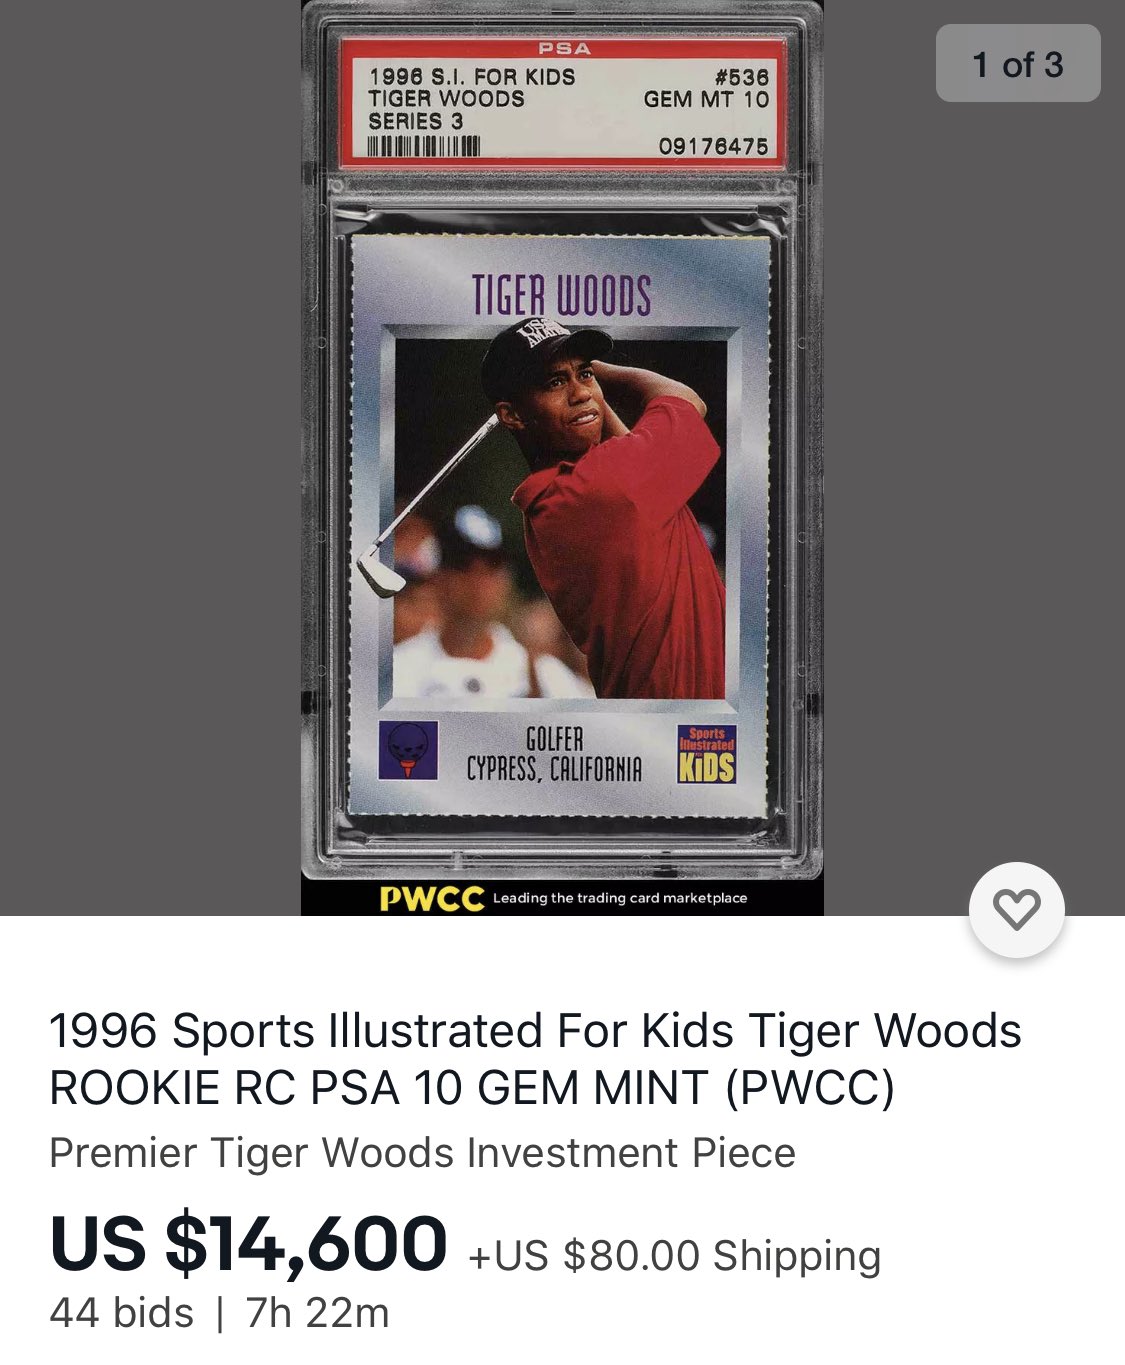 Patrick Ryan Twitter: "Another crazy sports card auction ending tonight ... rare PSA 10 of the 1996 @TigerWoods card from Sports Illustrated for kids A sheet of 9